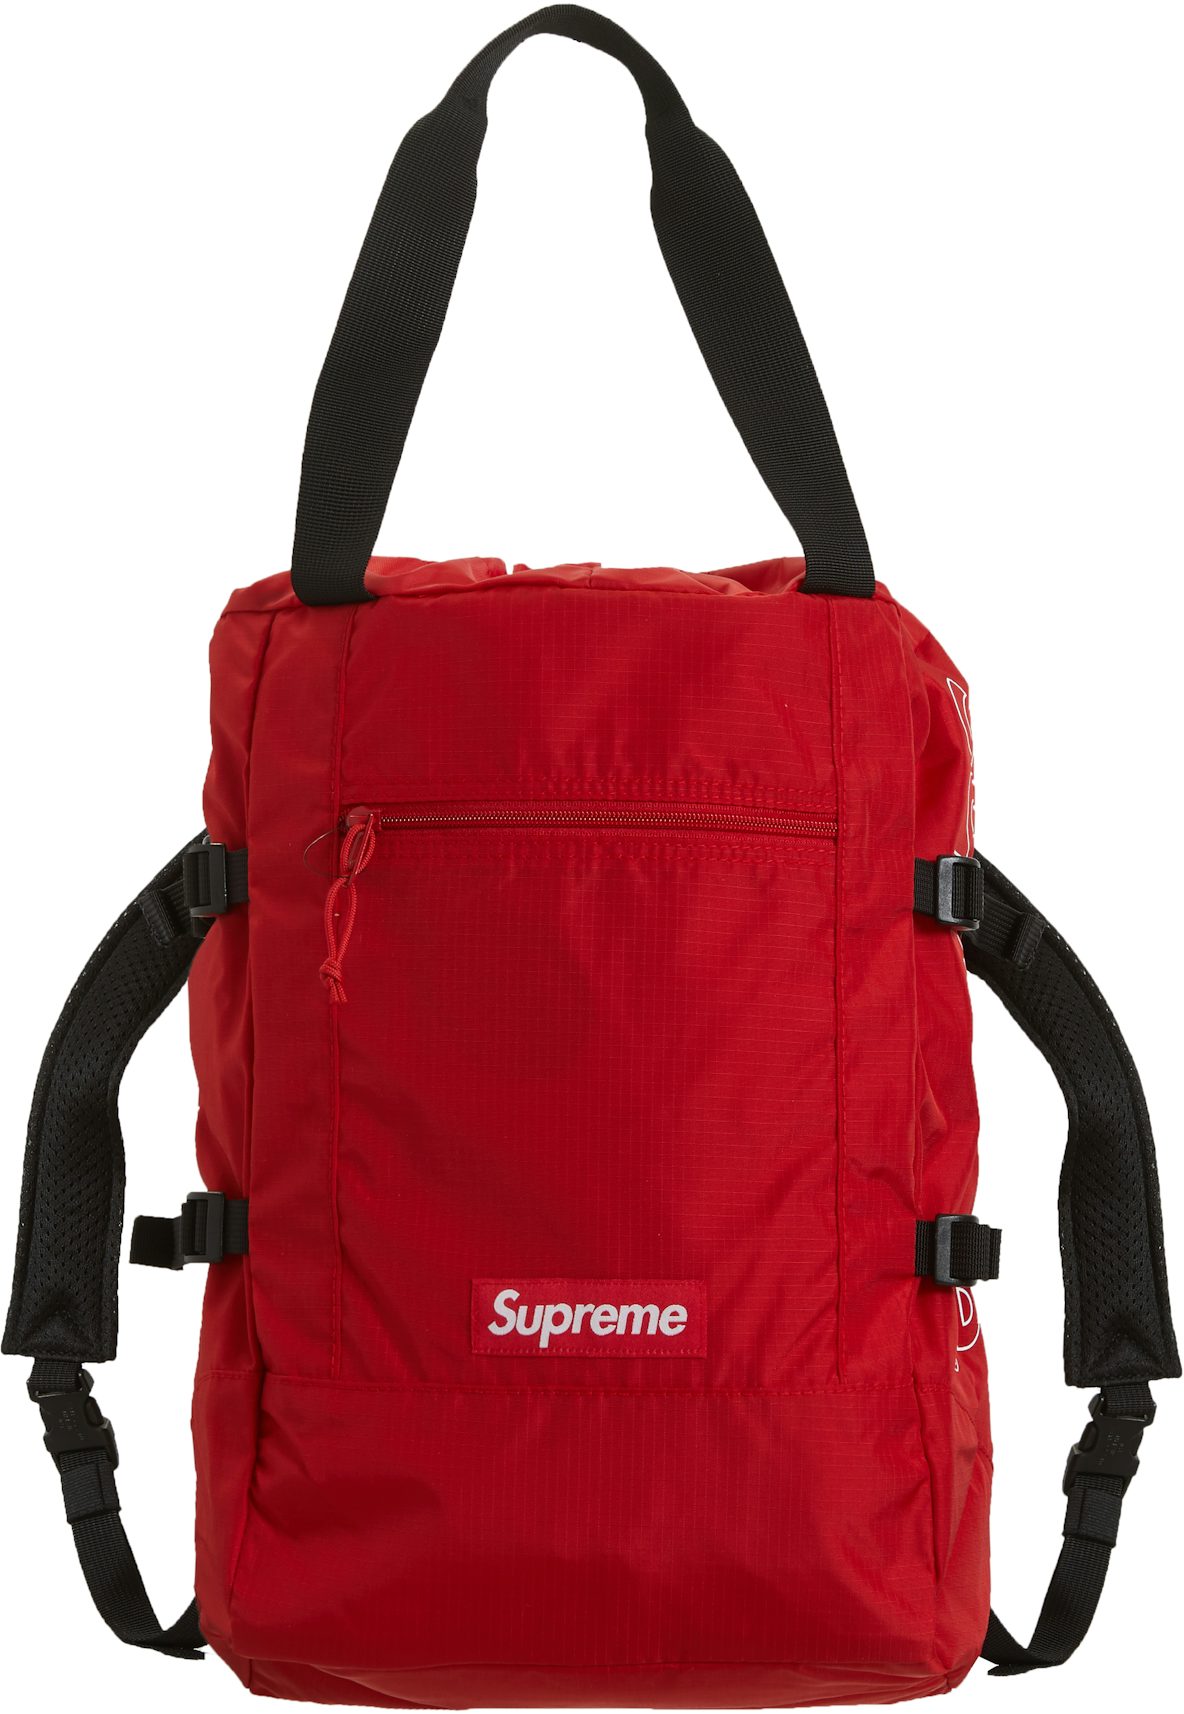 Supreme Tote Backpack Red Royal Box Logo (New) 2019 (100% Authentic)